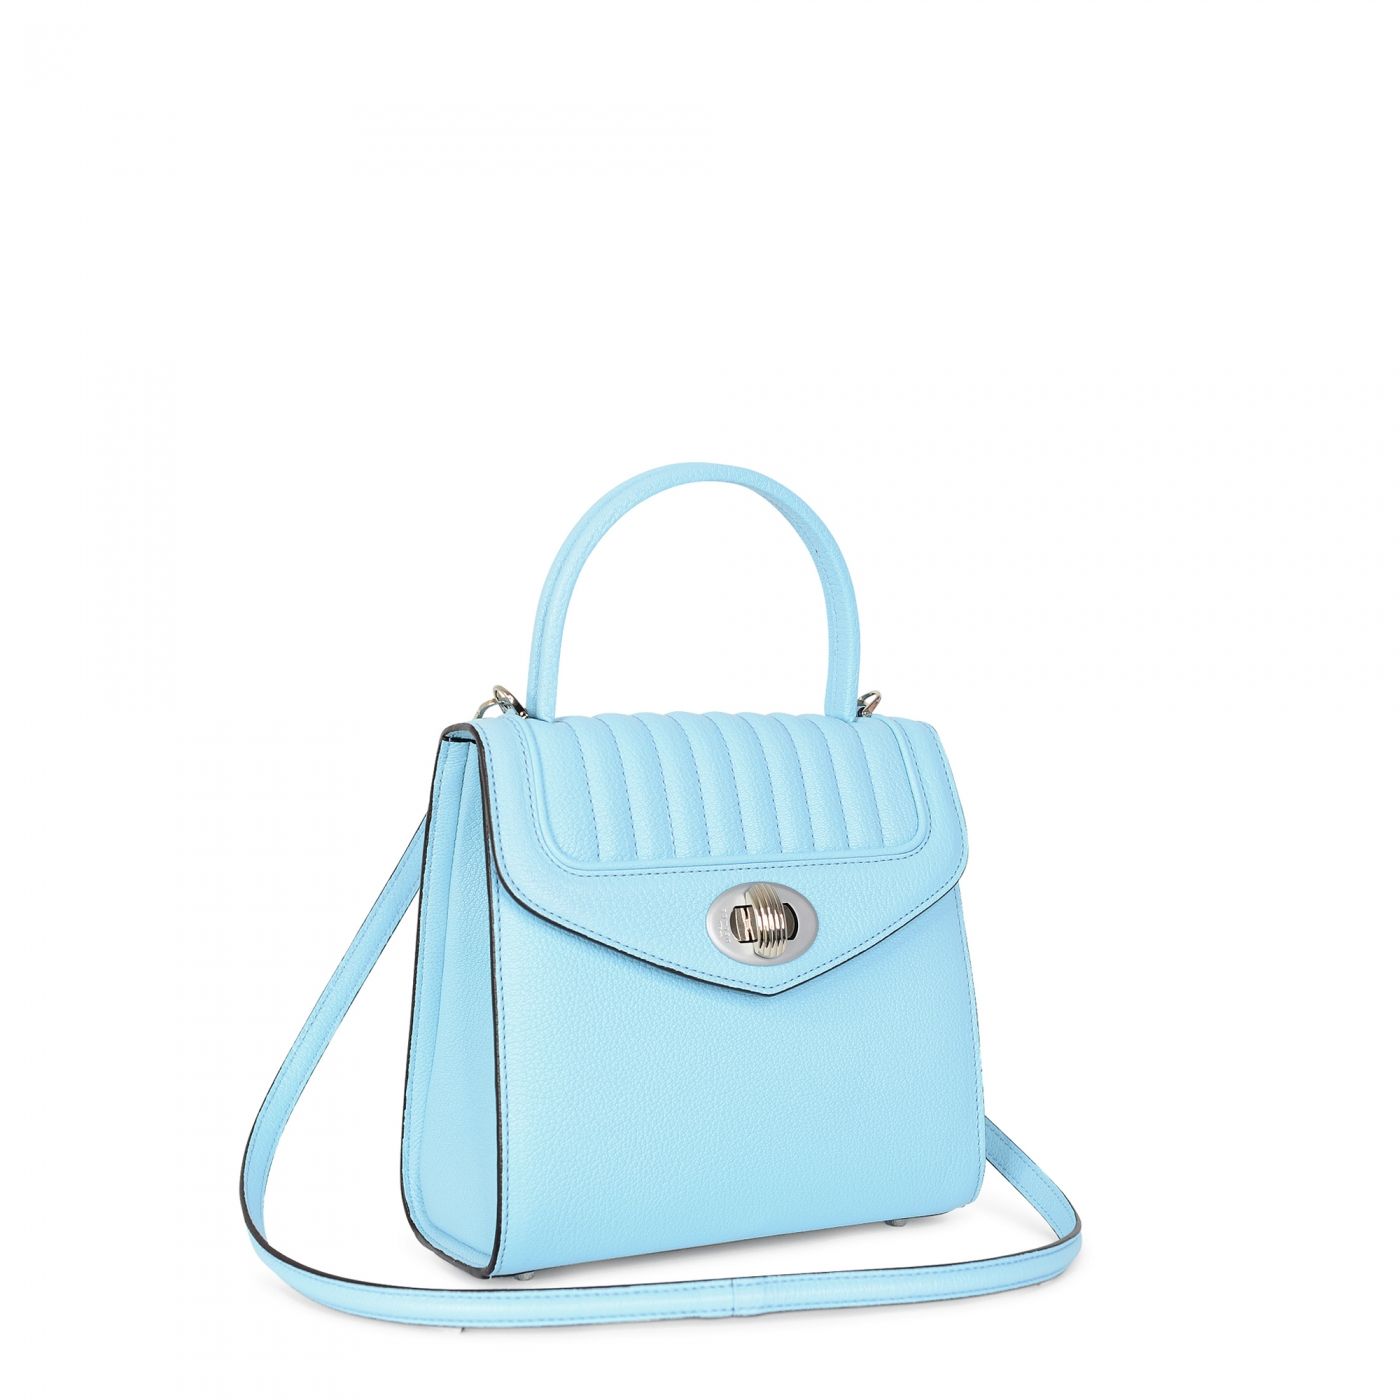 Woman's hand bag of high quality Freda Mini in light blue leather Delage